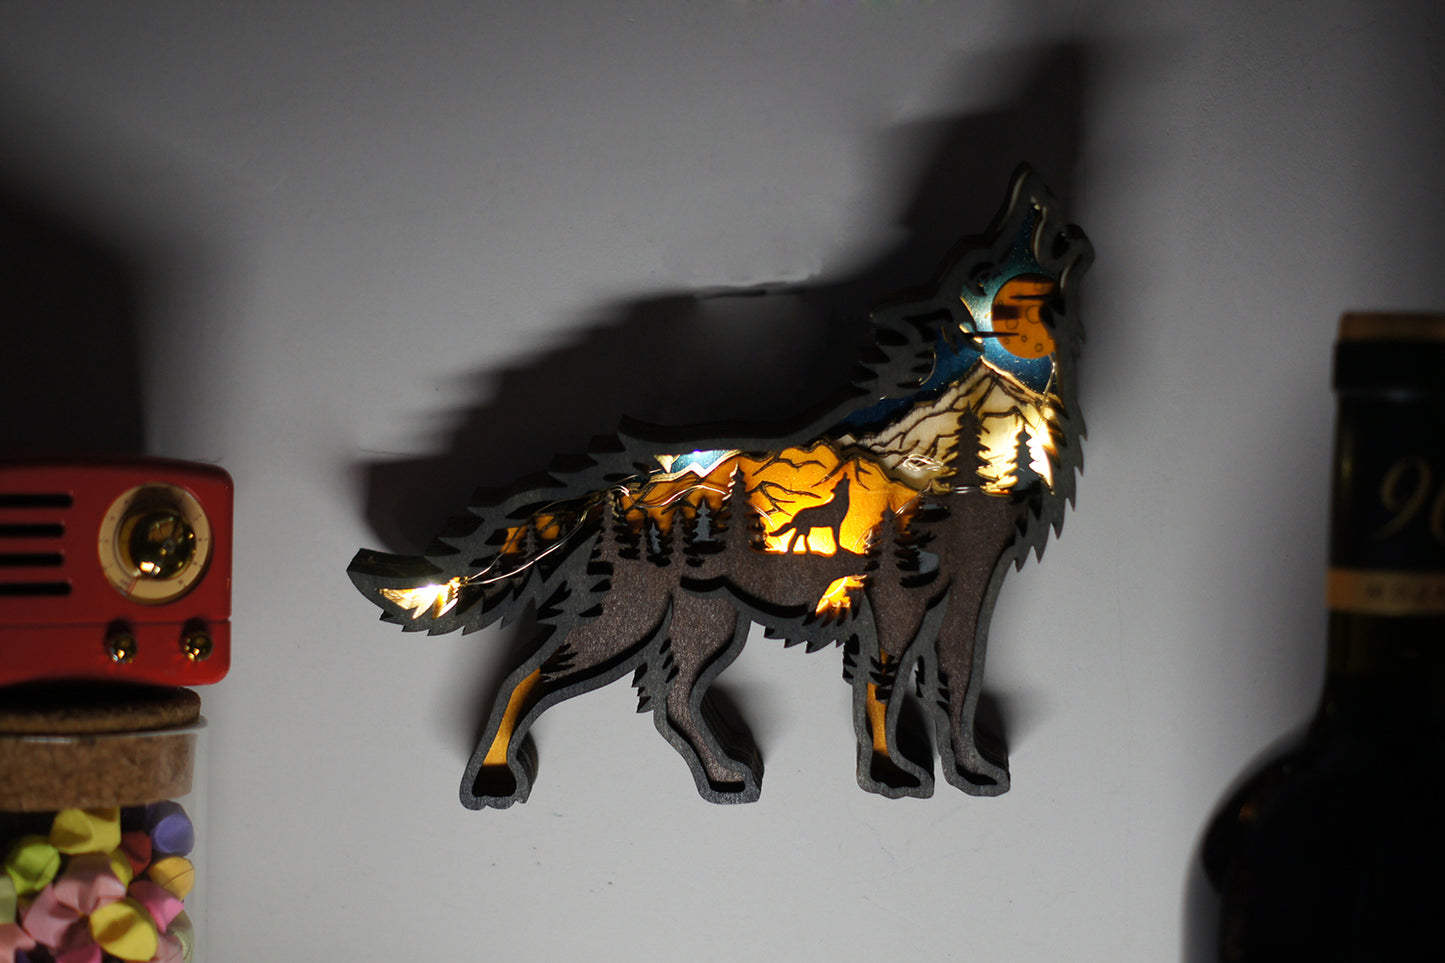 3D Wooden Wolf carved with lights ,Wooden Forest Scene,Desktop ornaments,Wall Decoration,Door Decor,Free Engraving